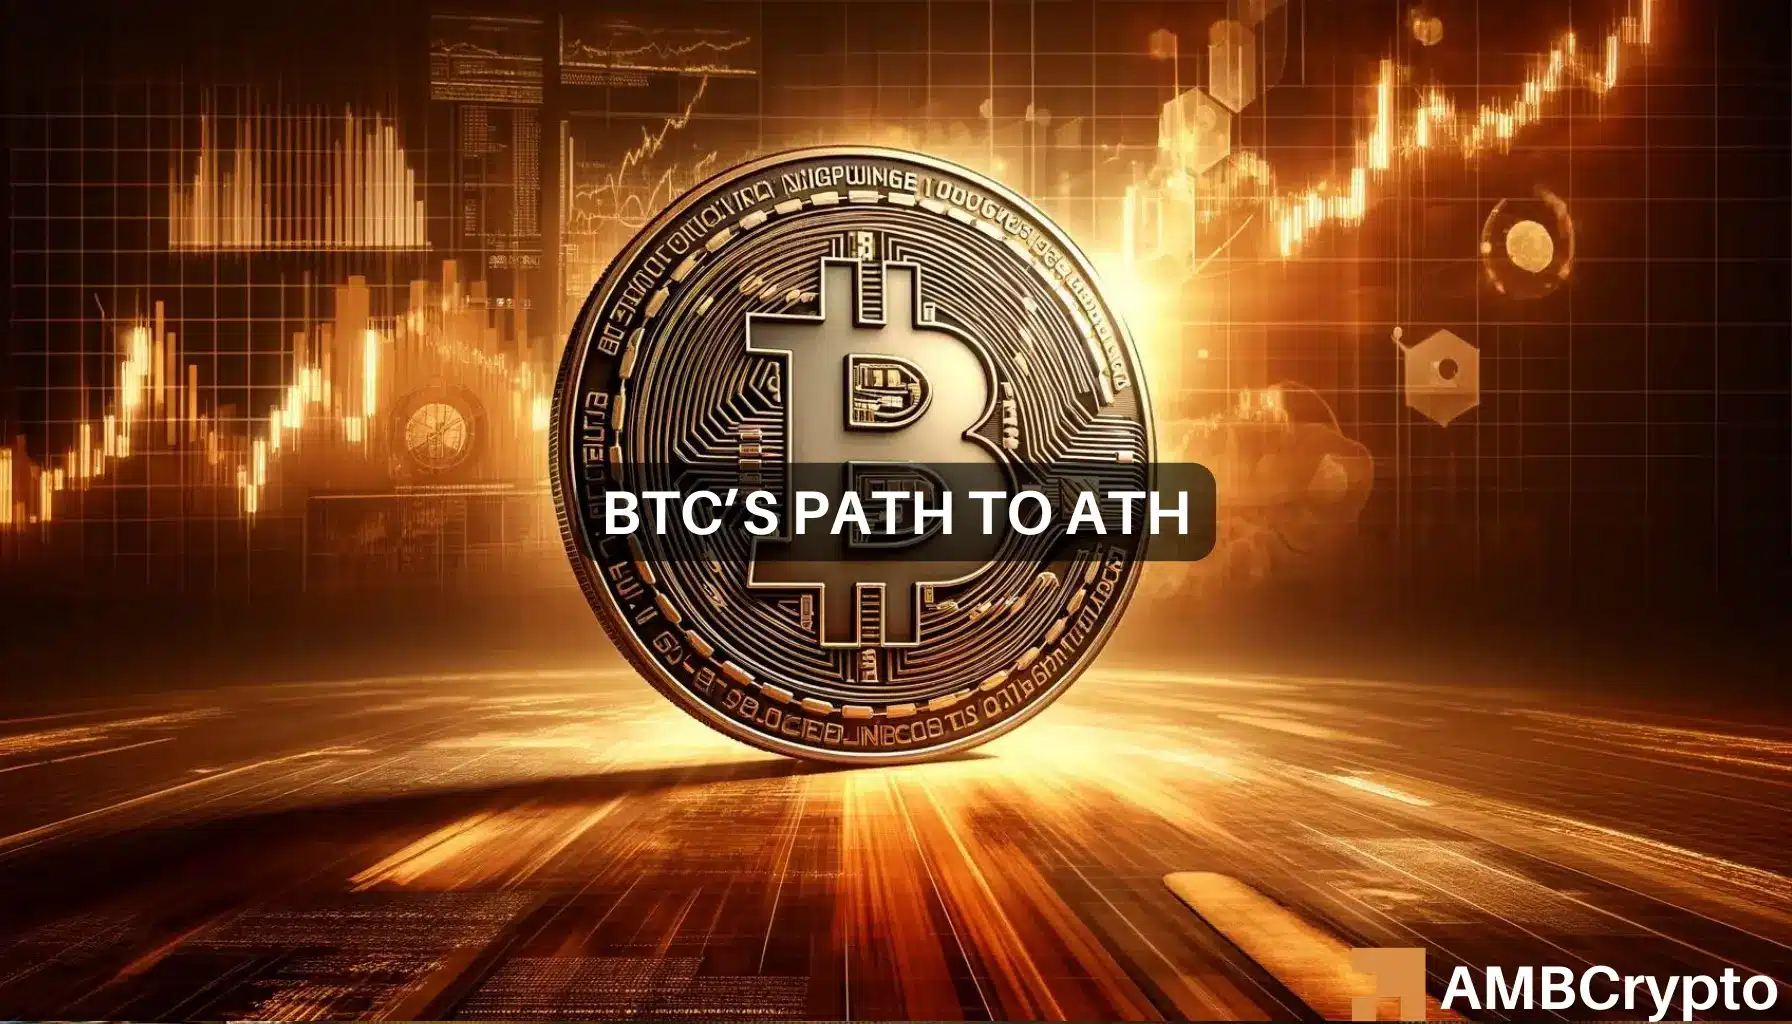 Why Bitcoin might drop to $65k before getting back to ATH